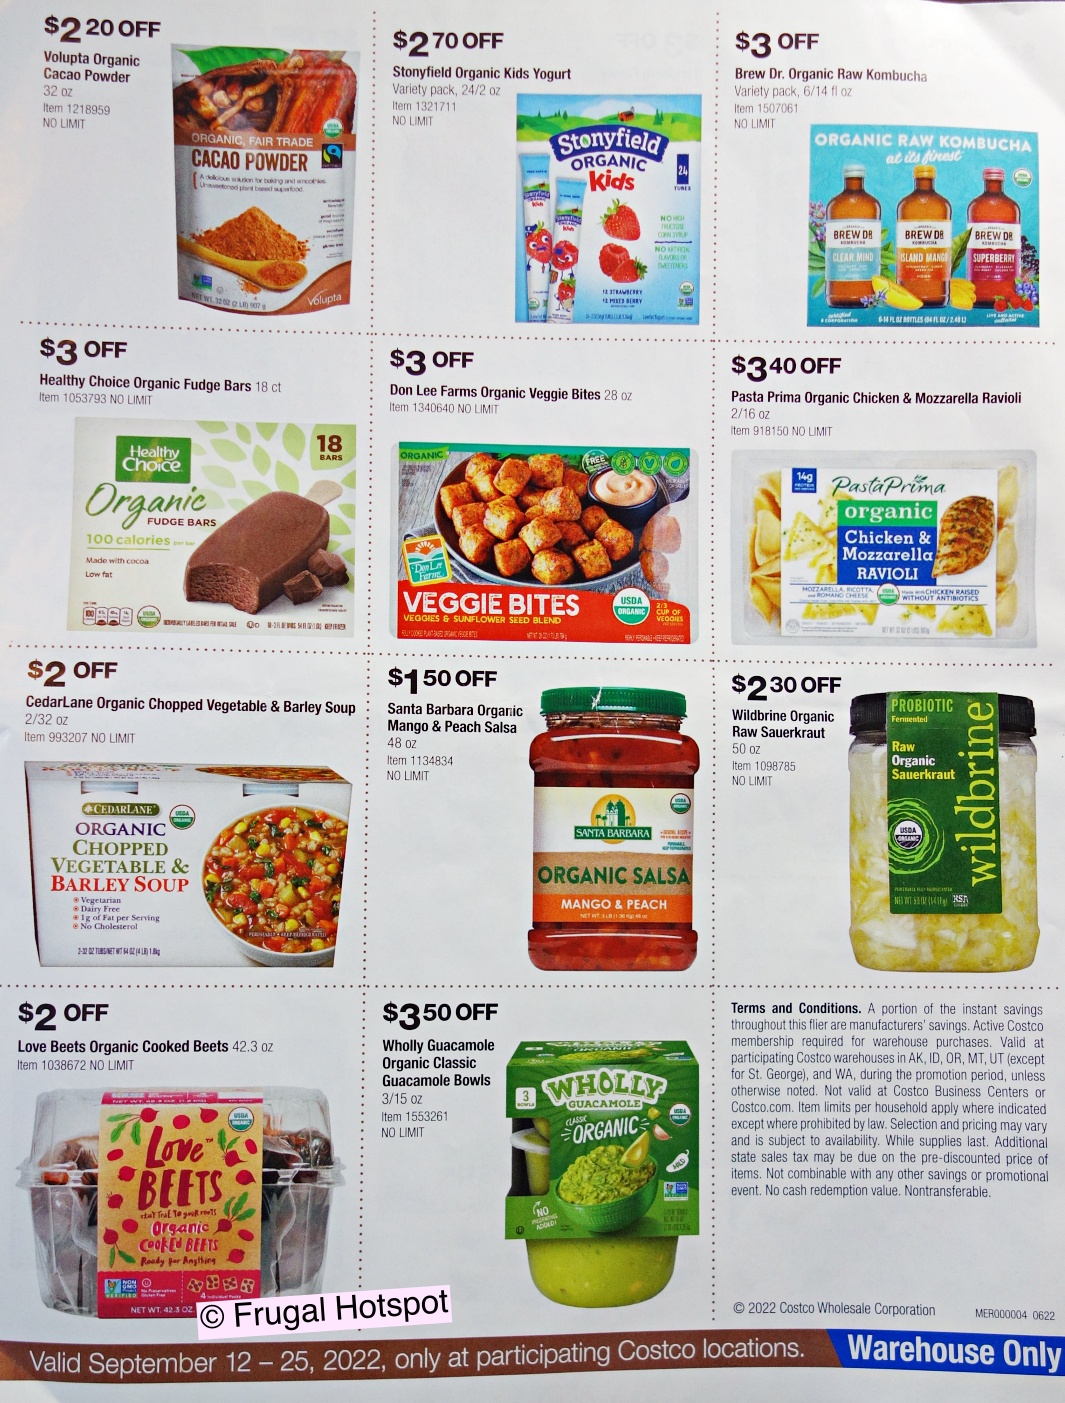 Costco Organic Coupon Book September 2022 | Page 4